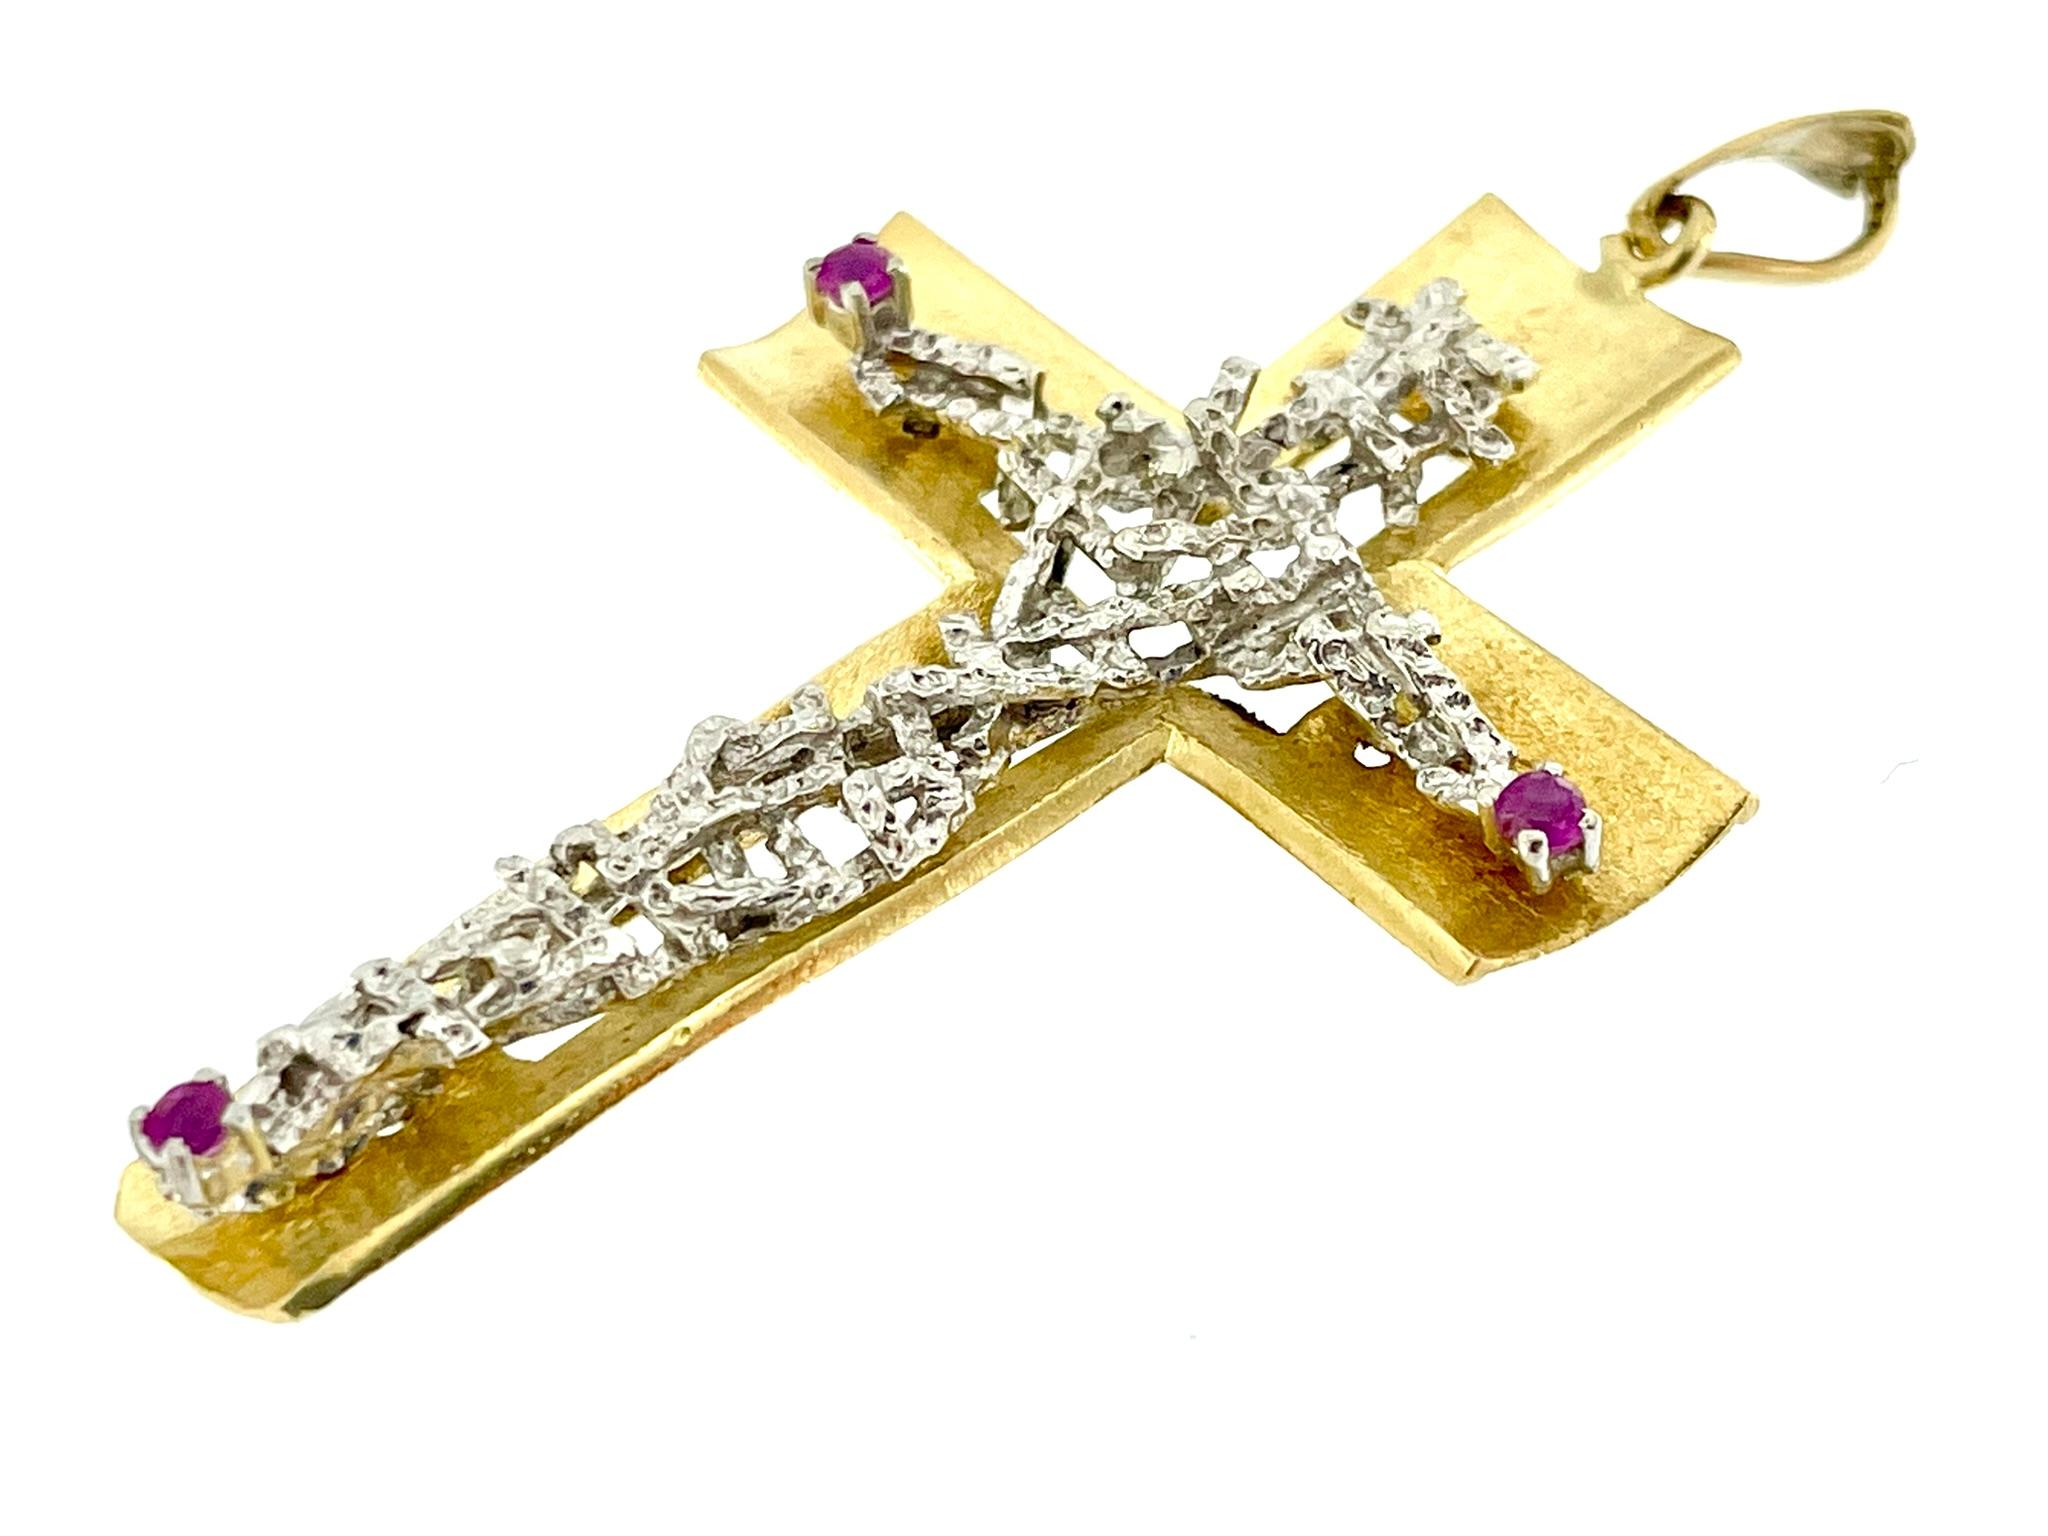 Brilliant Cut Hand-Made 18kt Gold Italian Crucifix with Rubies For Sale